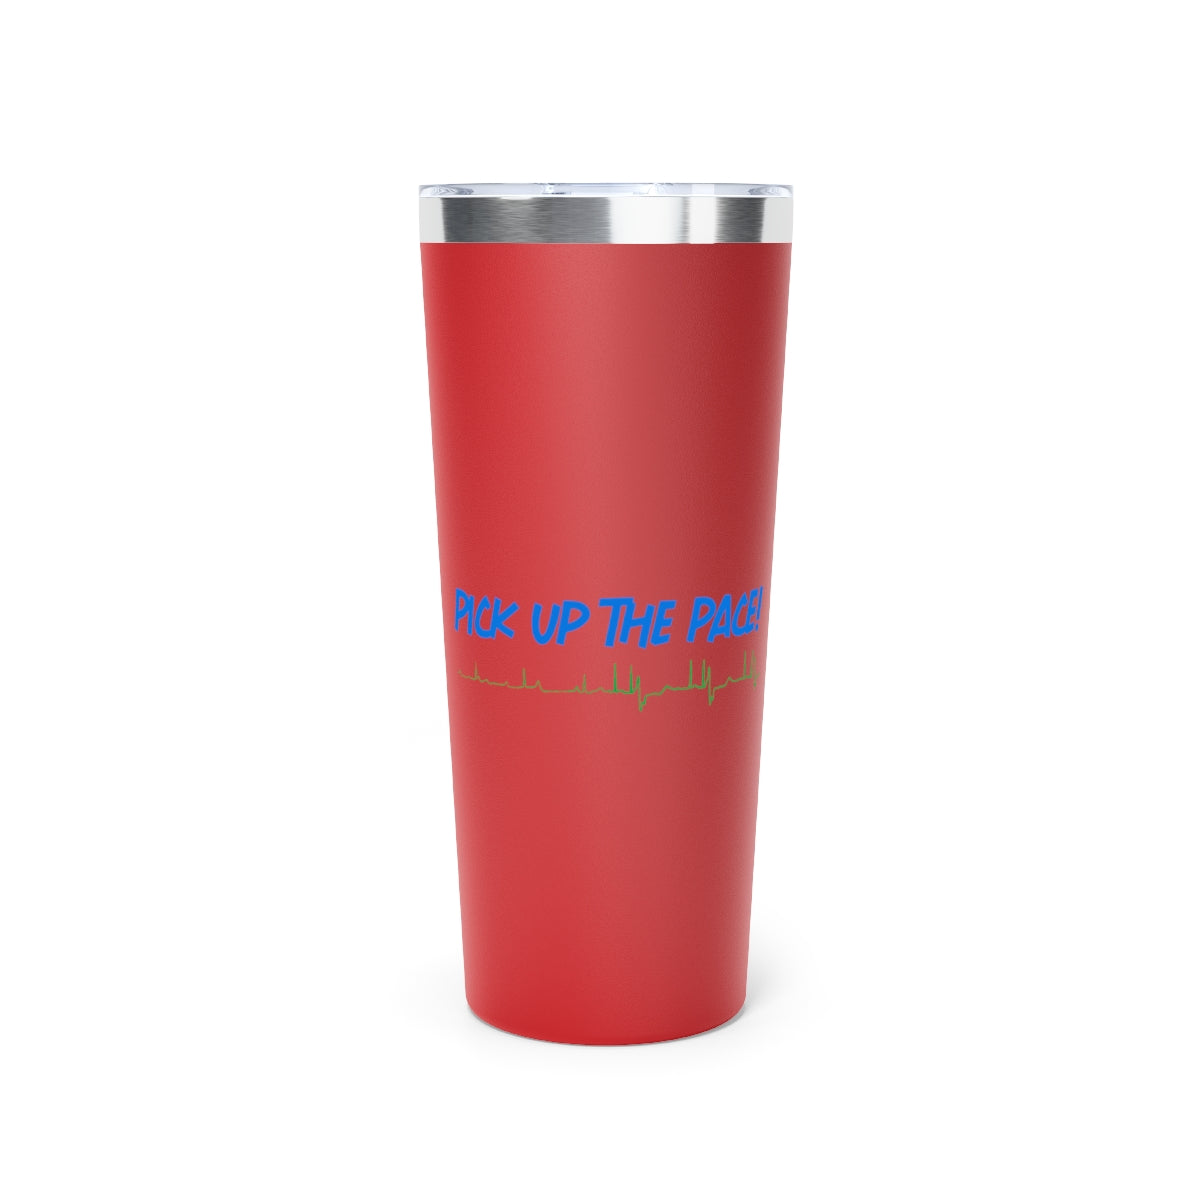 Pick Up the Pace! Copper Vacuum Insulated Tumbler, 22oz